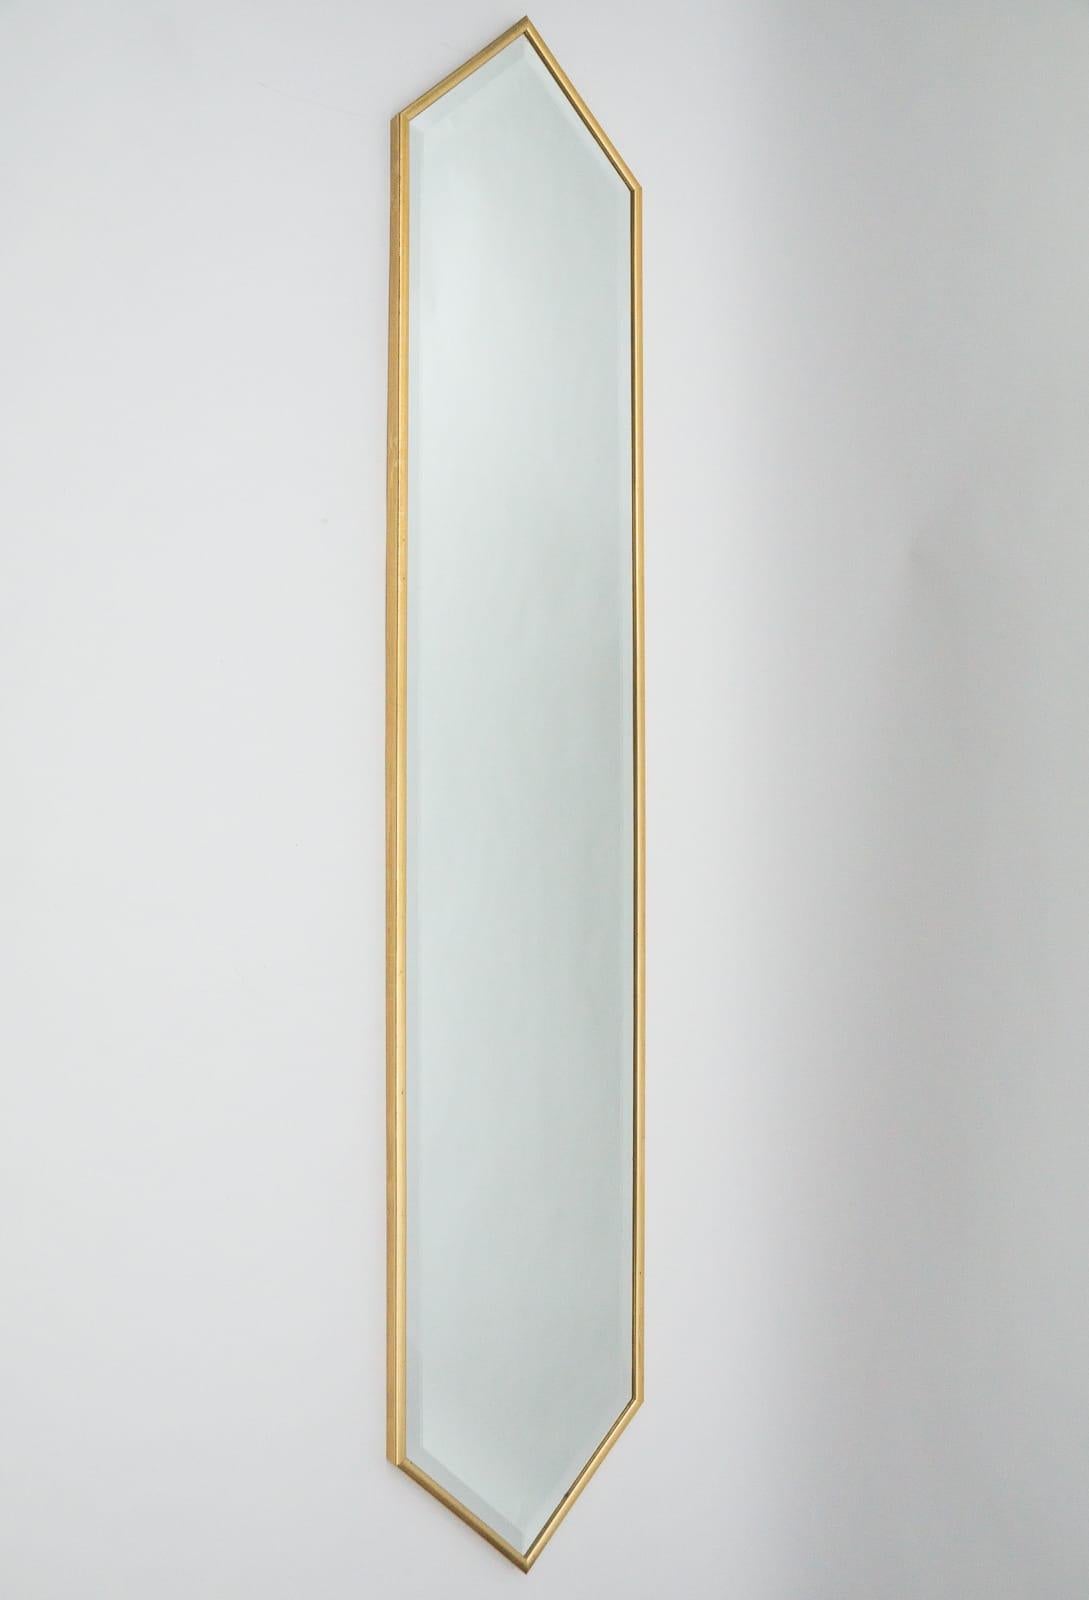 You offer here three equally large, beautiful and elegant mirrors in a dreamlike shape and height of 198cm.

The mirrors are ground, all around.